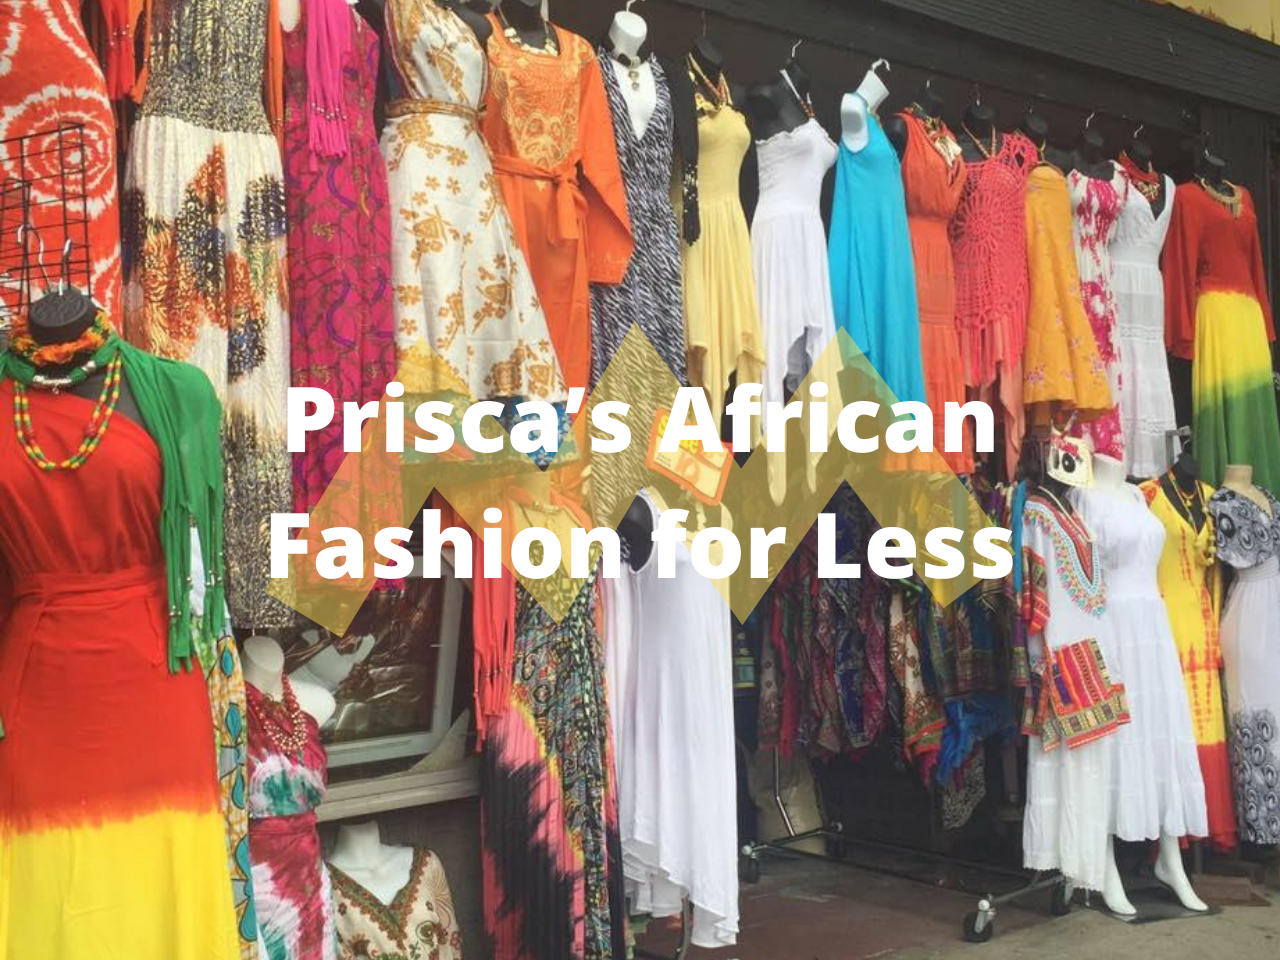 Prisca’s African Fashion for Less